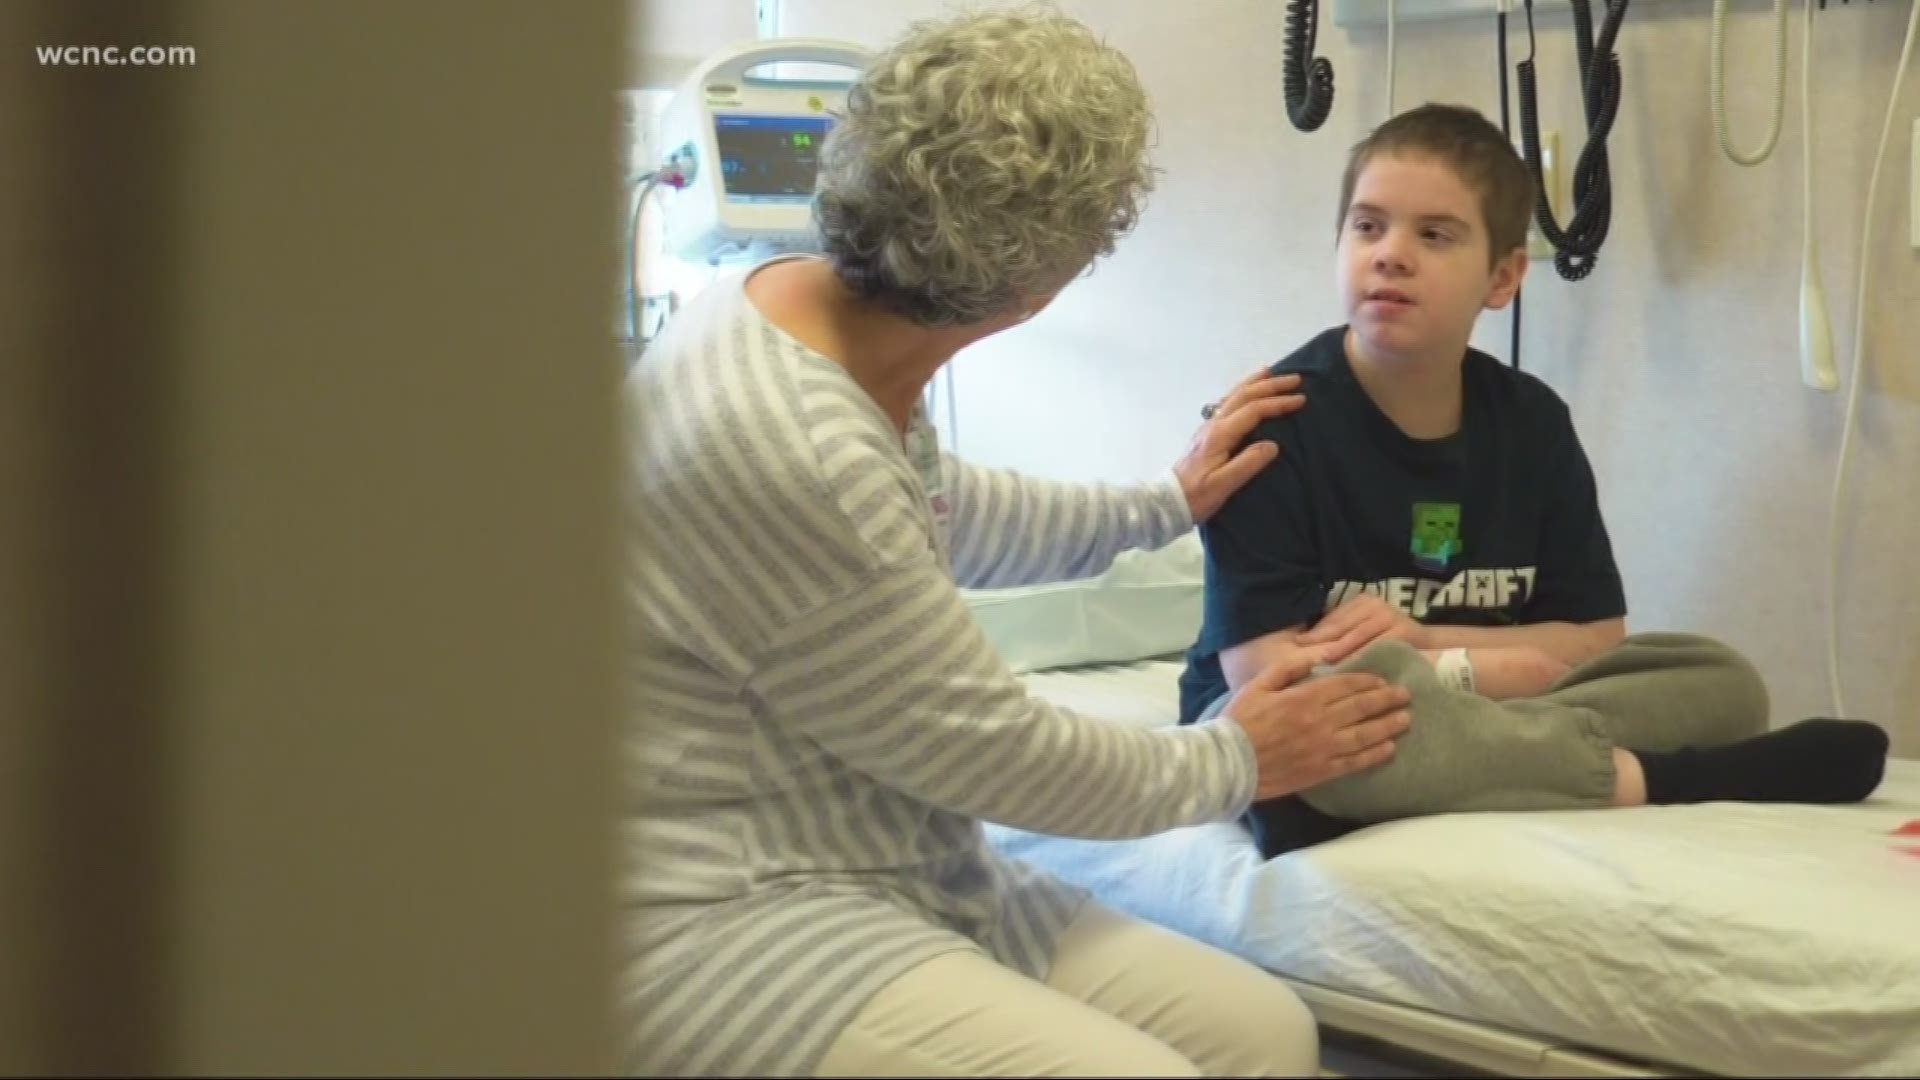 They supportive therapy program forces on treating young patients with outside the box idea therapy, more than just chemo and surgery.